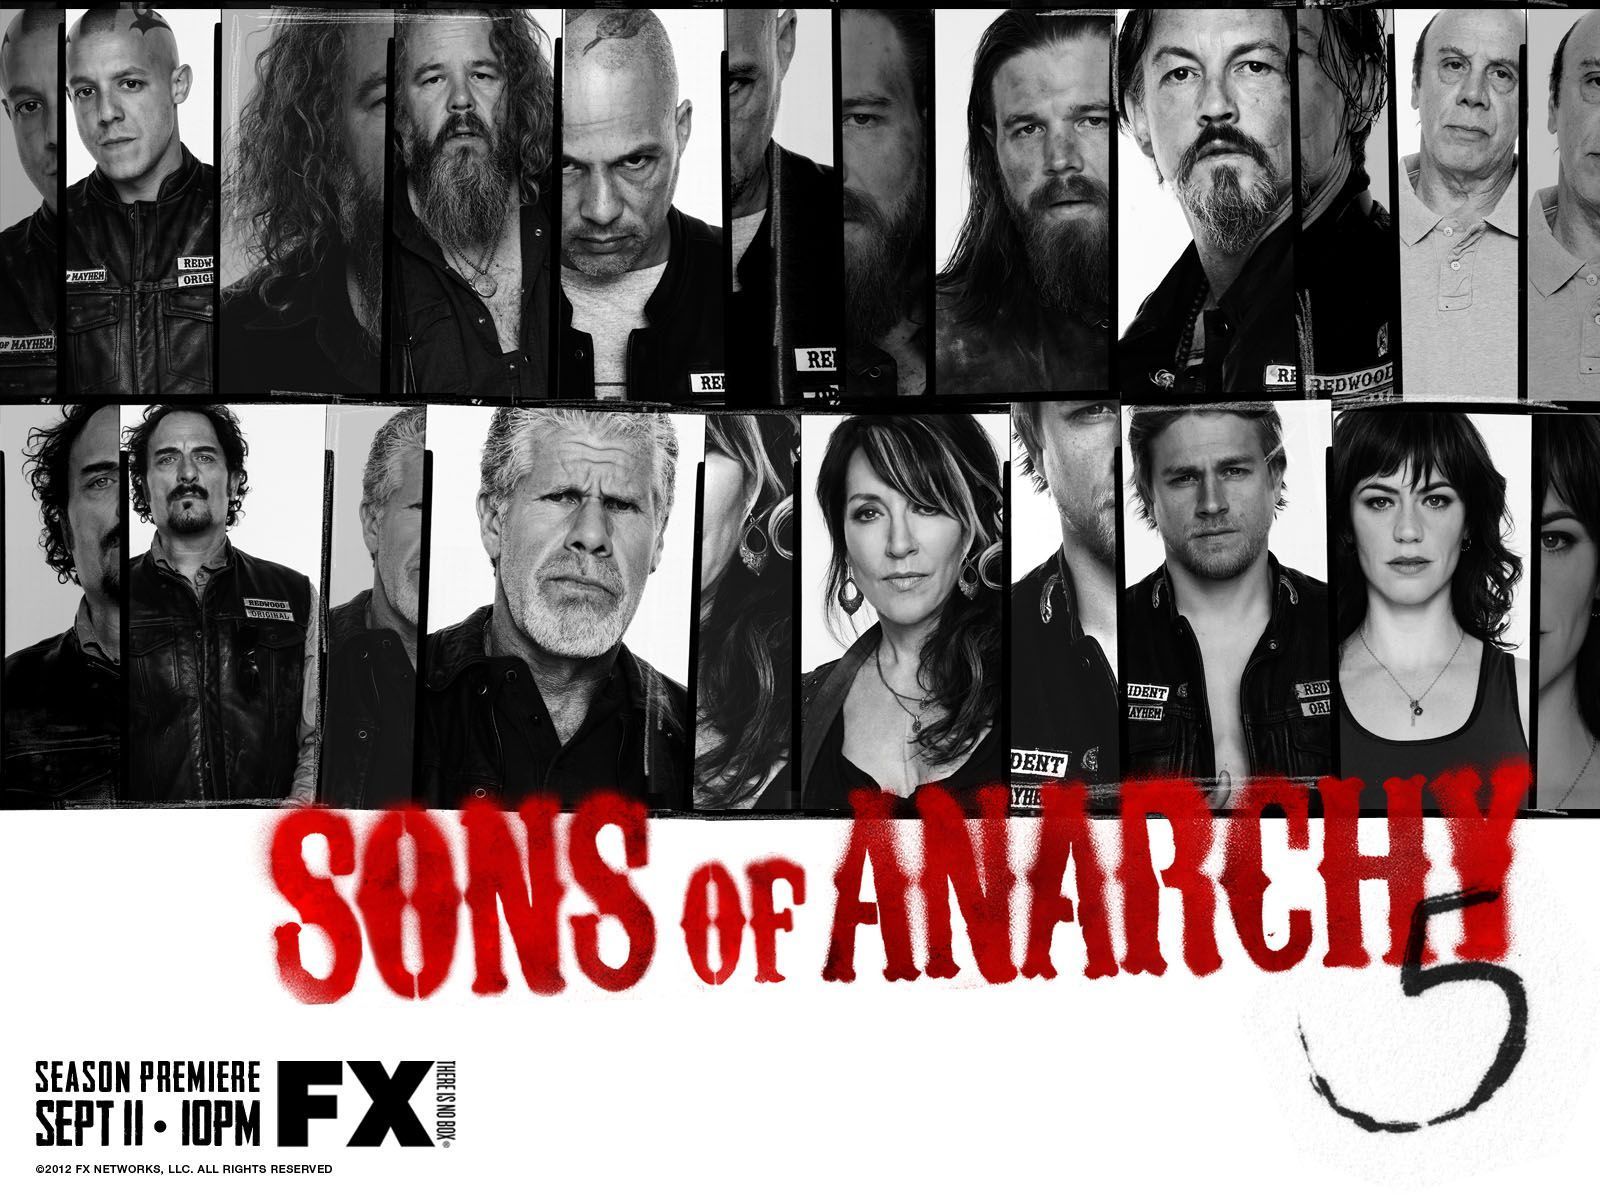 Sons Of Anarchy - Sons Of Anarchy Wallpaper (32111954) - Fanpop